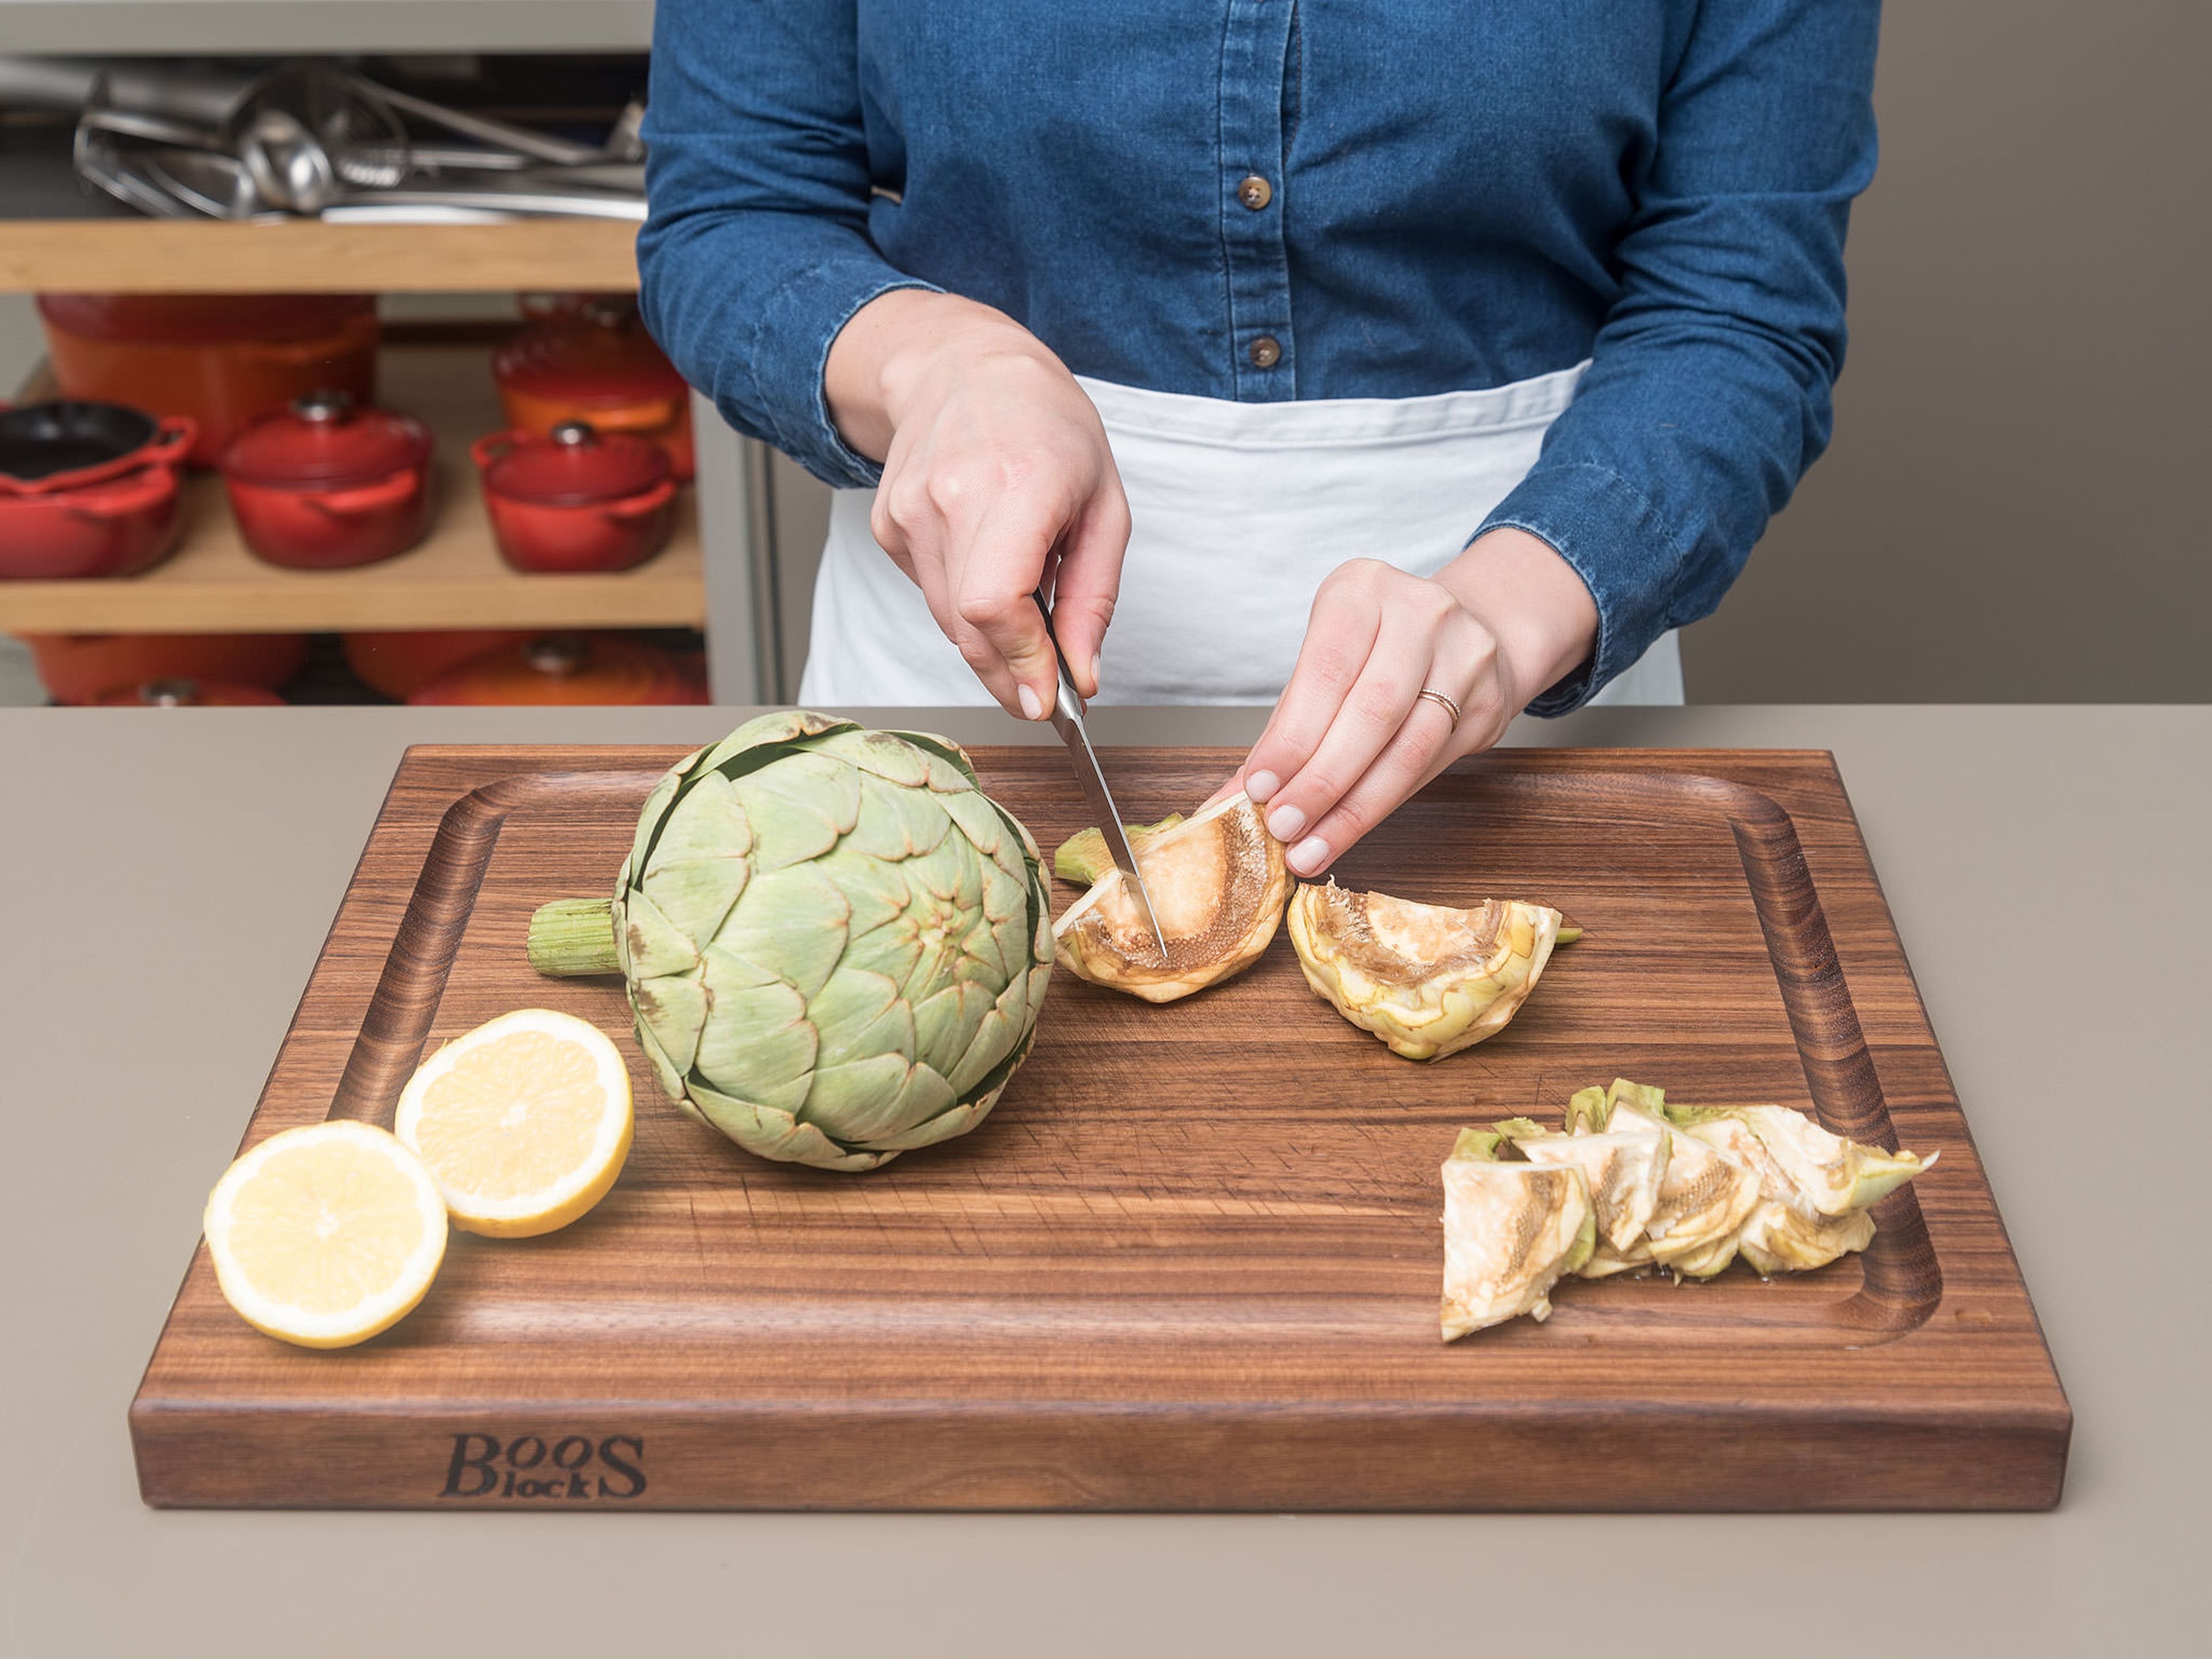 Preheat oven to 190°C/375°F. Add juice of half of lemon  to a large bowl of water. Remove outer leaves of artichokes until you reach the pale yellow center, periodically dipping the artichoke into the lemon water to prevent browning. Peel base and stem of artichoke, then slice off the top third of the artichoke leaves. Slice in half, then use a spoon to scoop out the fuzzy center and purple prickly leaves. Slice halves into thirds. Peel and crush garlic, slice other half of lemon, and halve tomatoes.